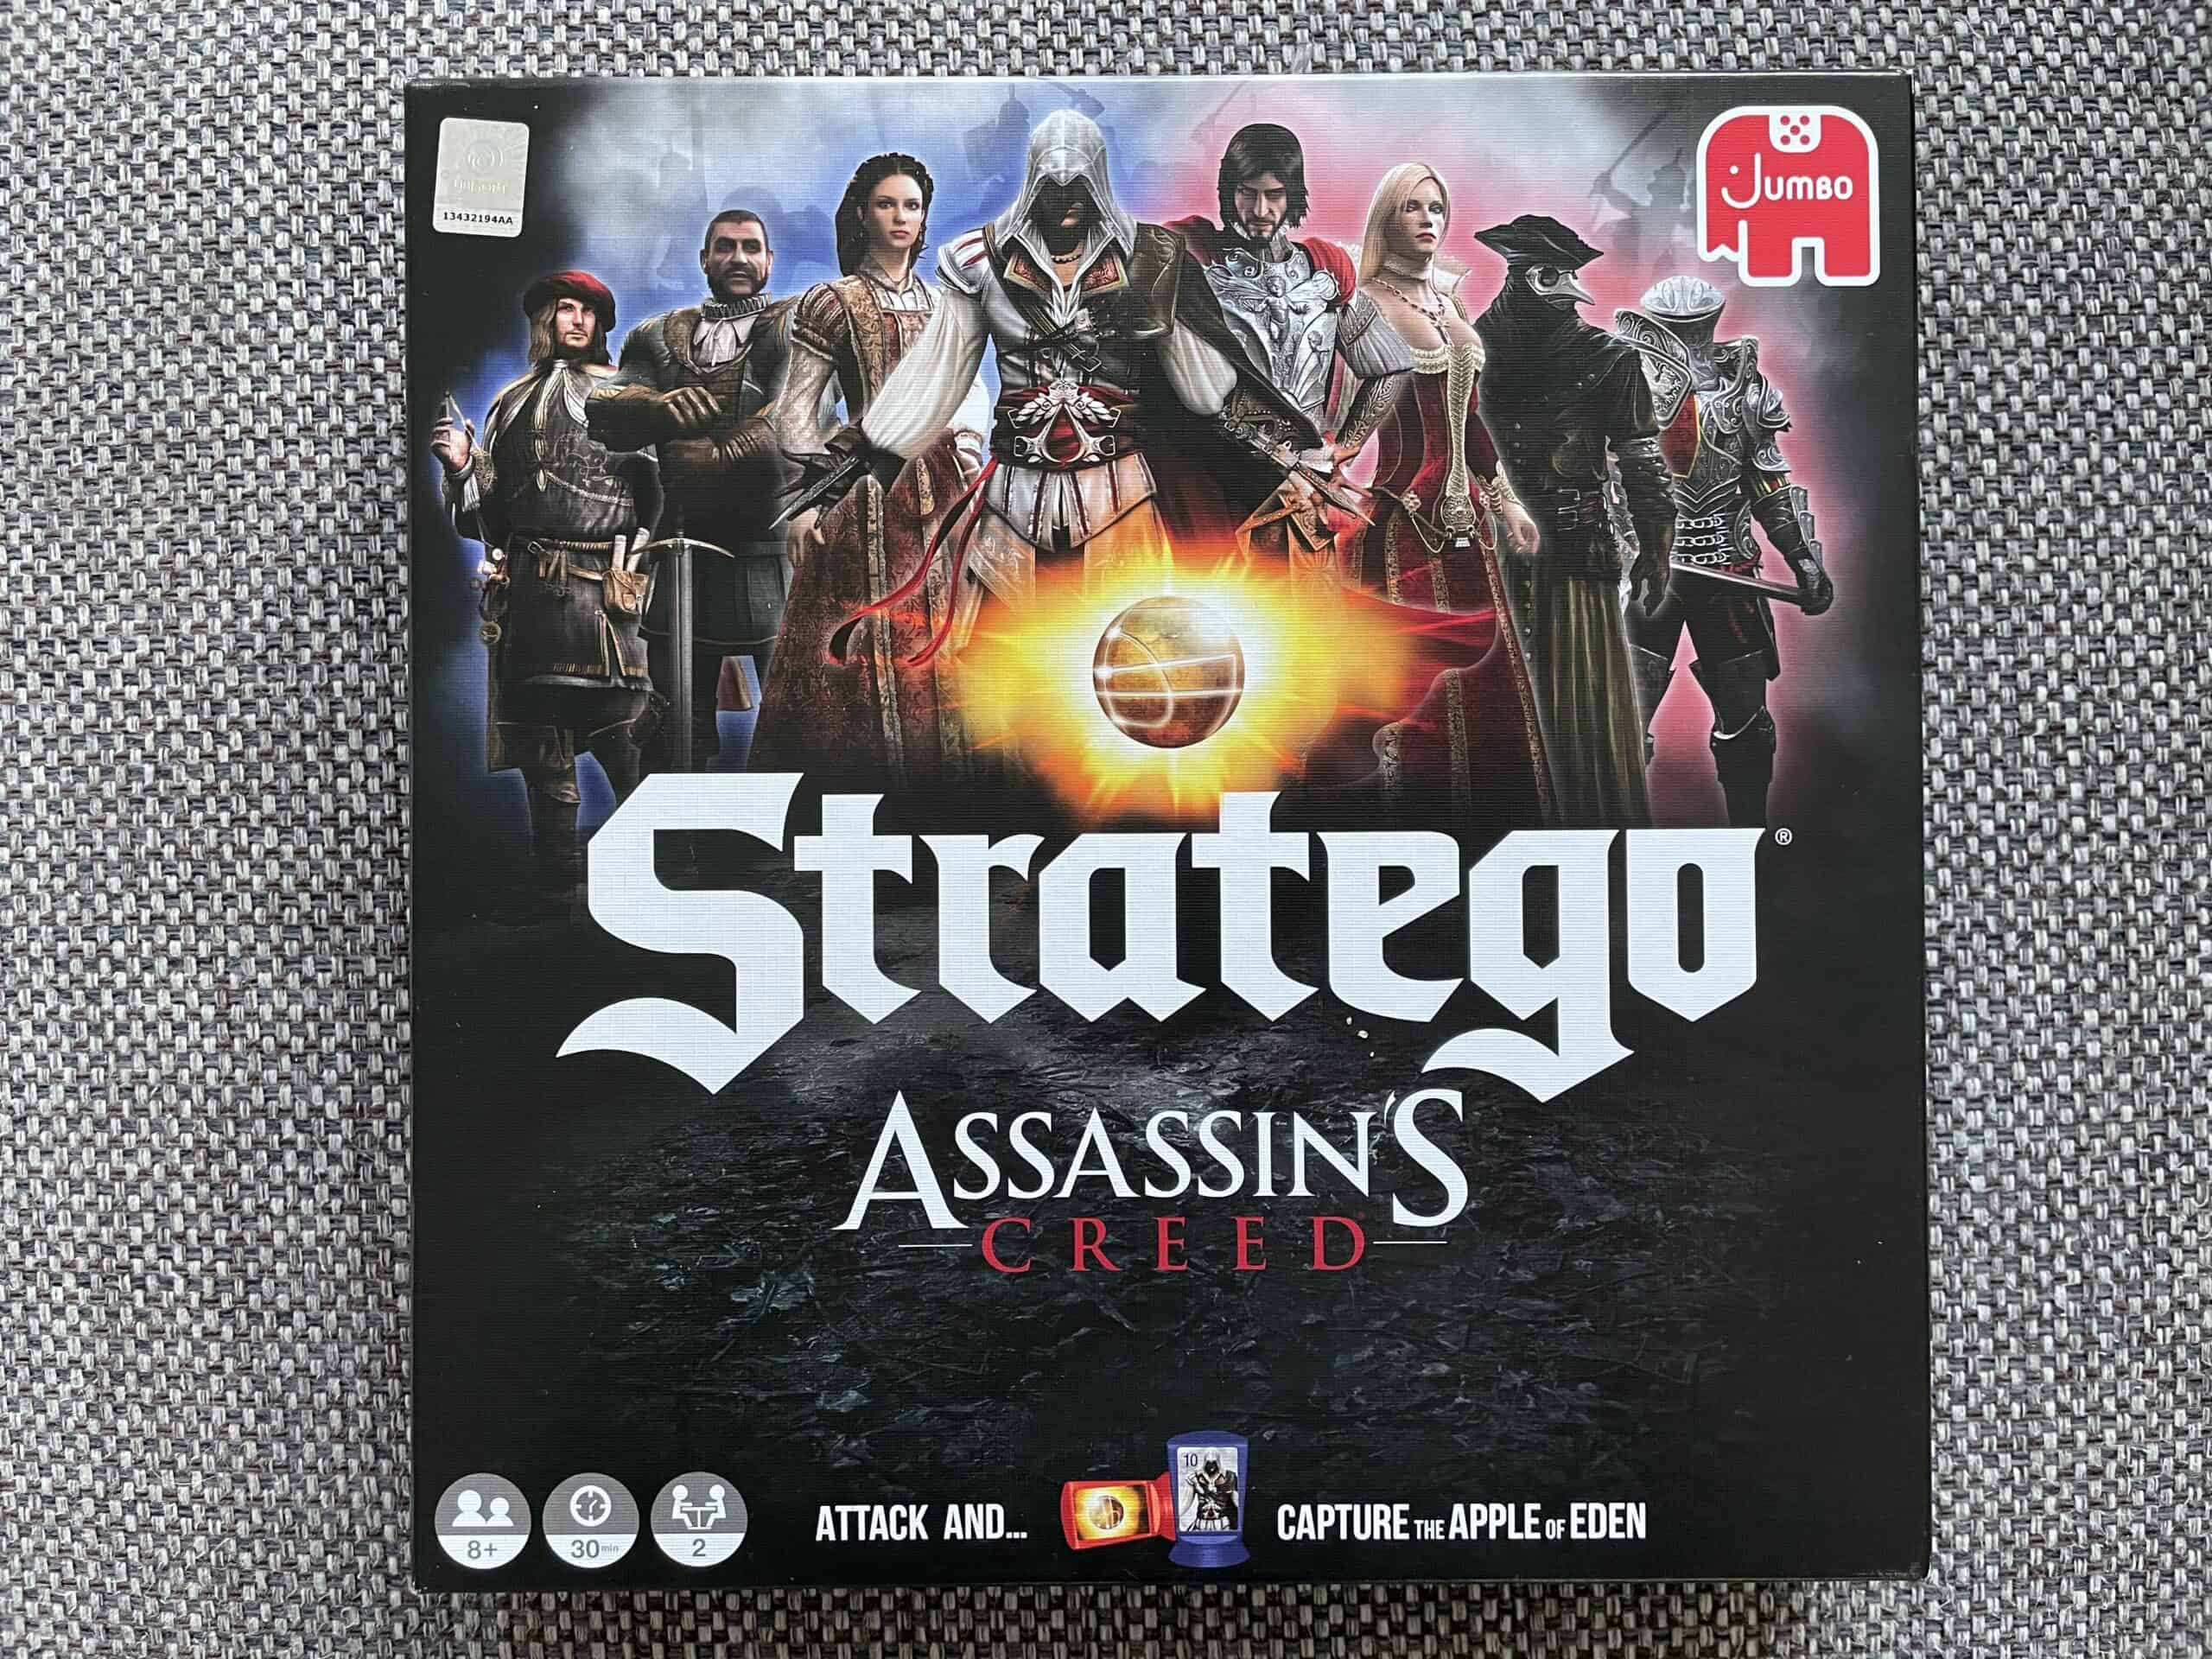 Stratego meets Assassin’s Creed feature